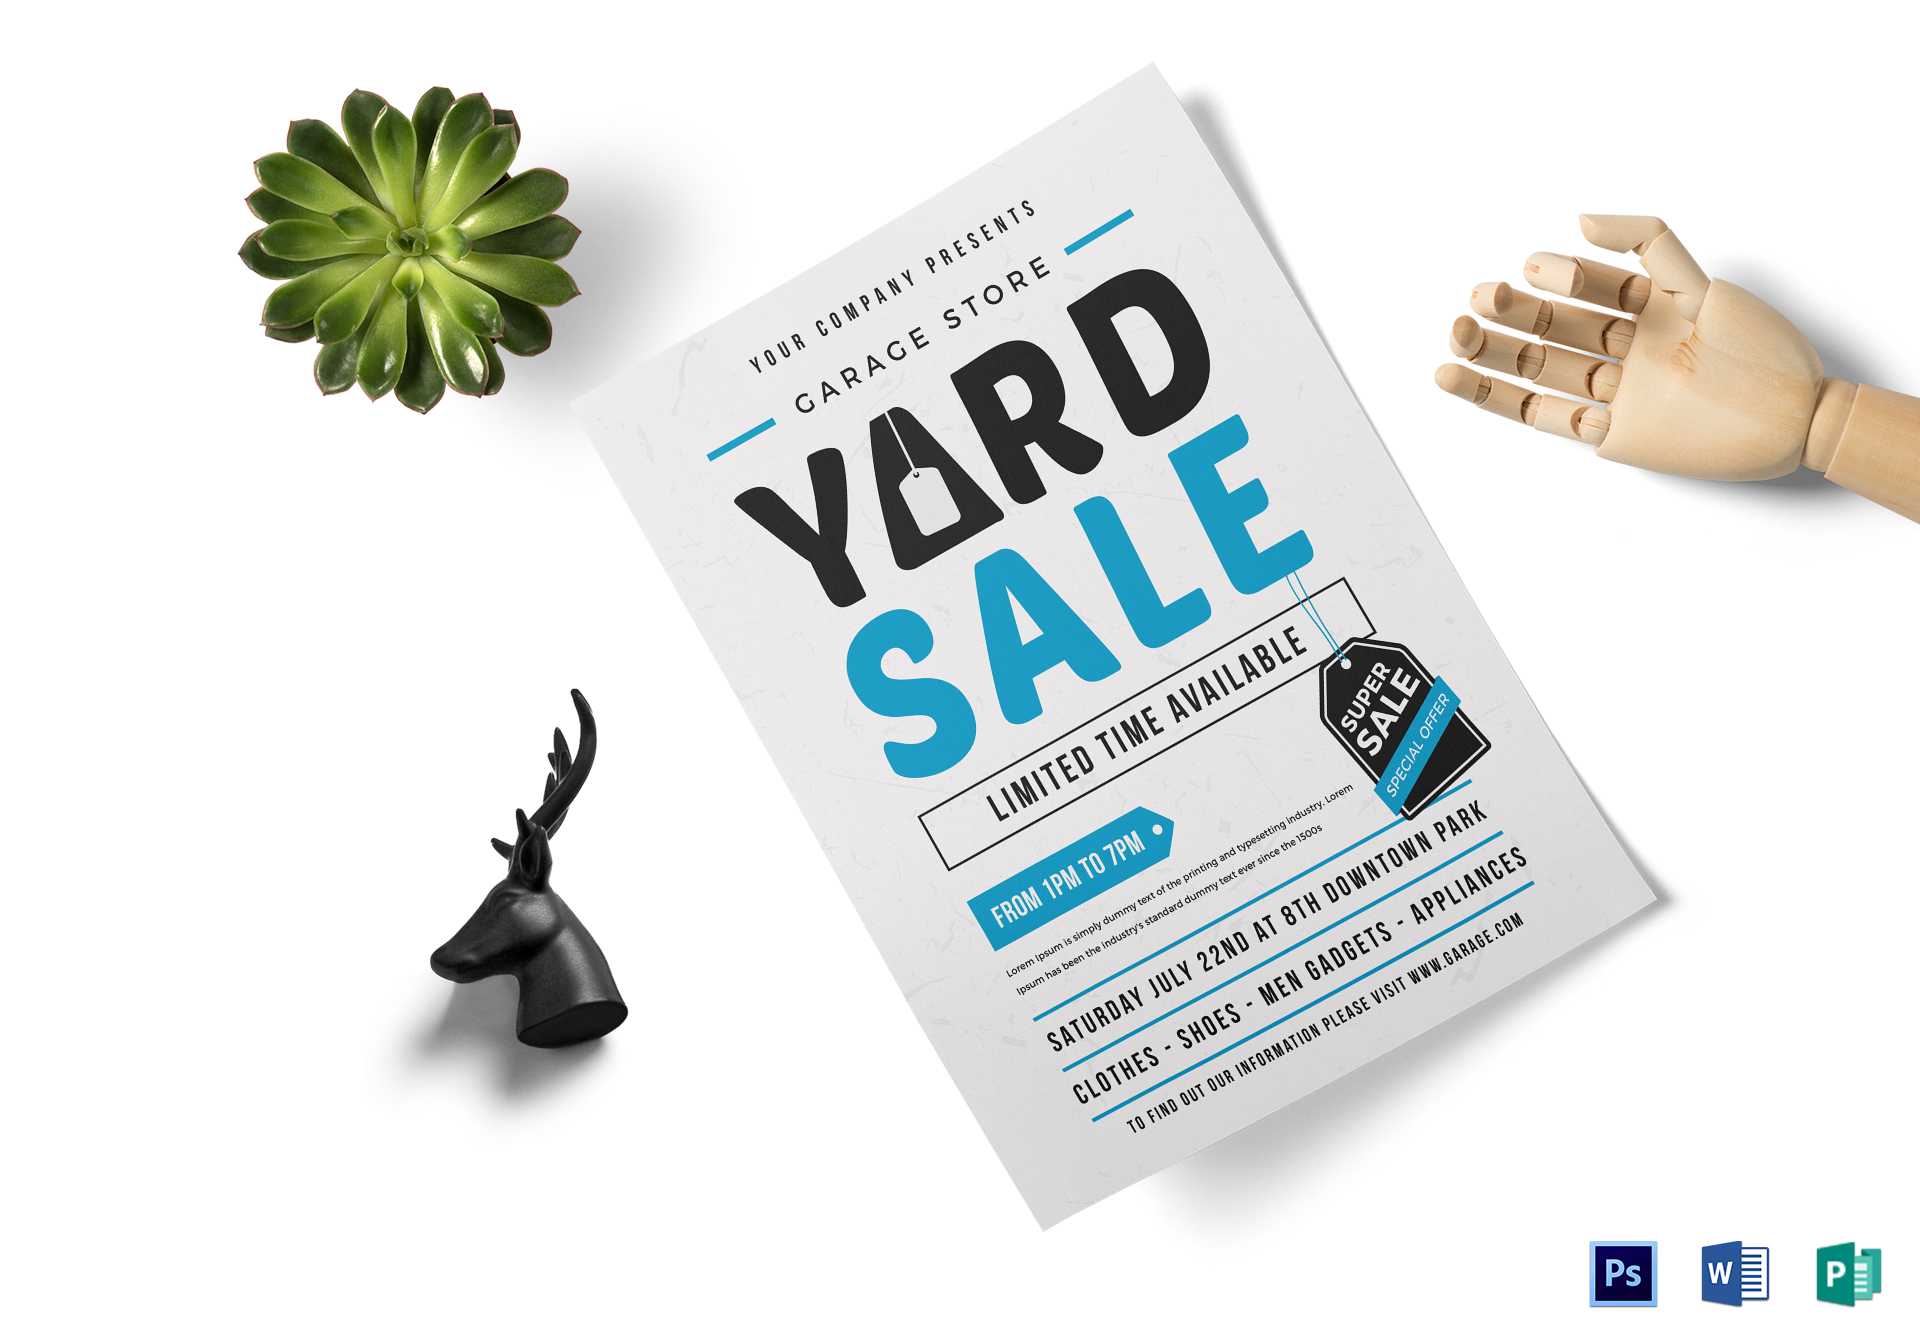 Unique Yard Sale Flyer Template For Yard Sale Flyer Template Word